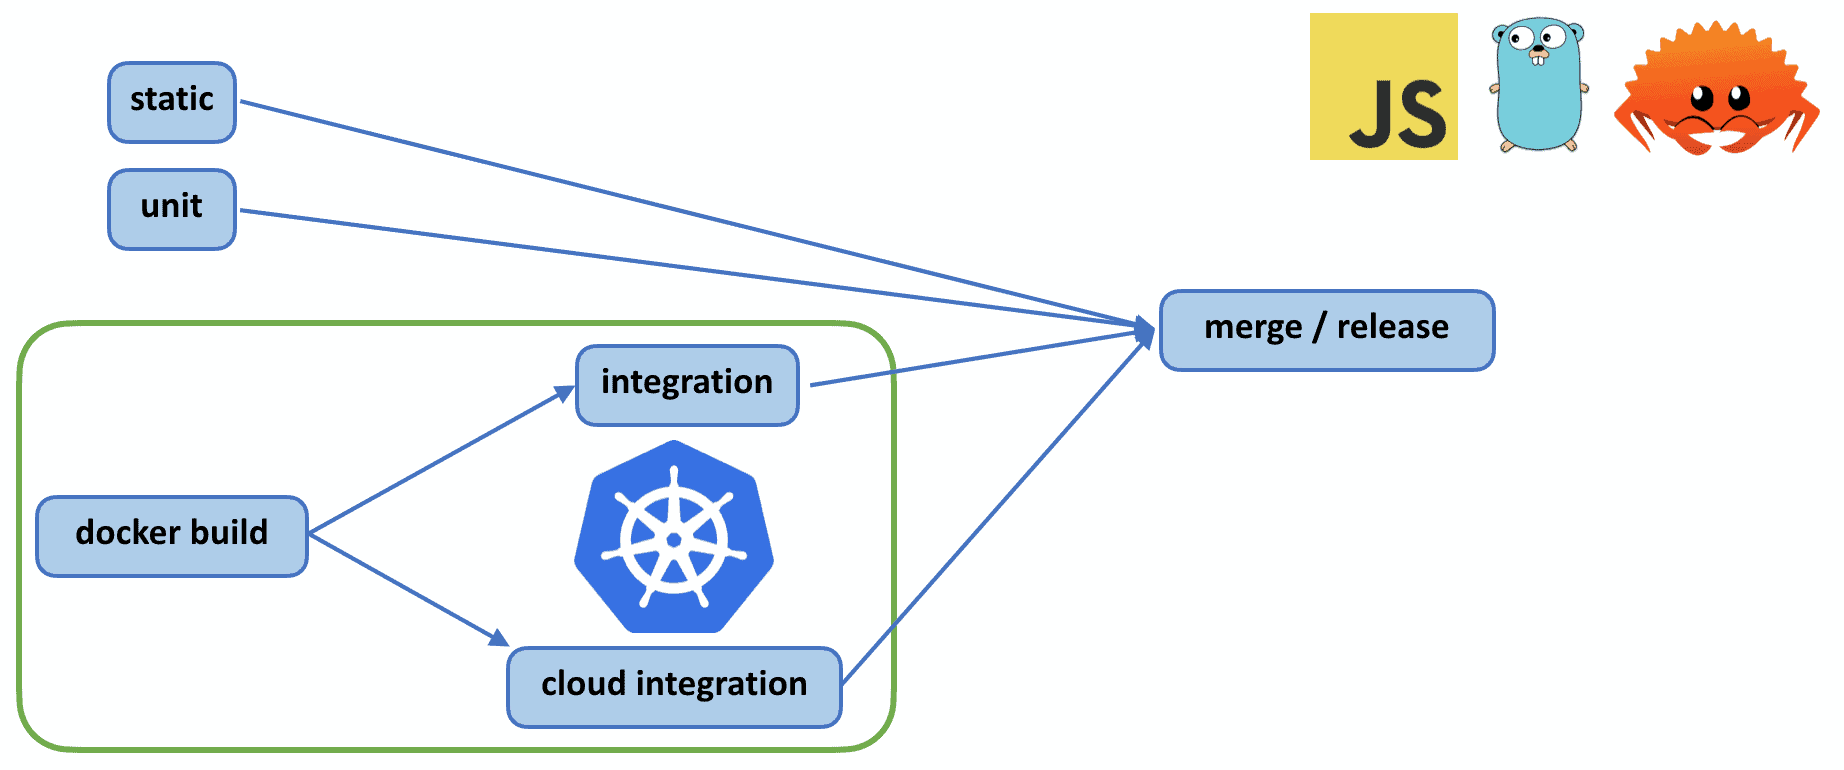 Integration tests can be seen in the green box in the lower left.